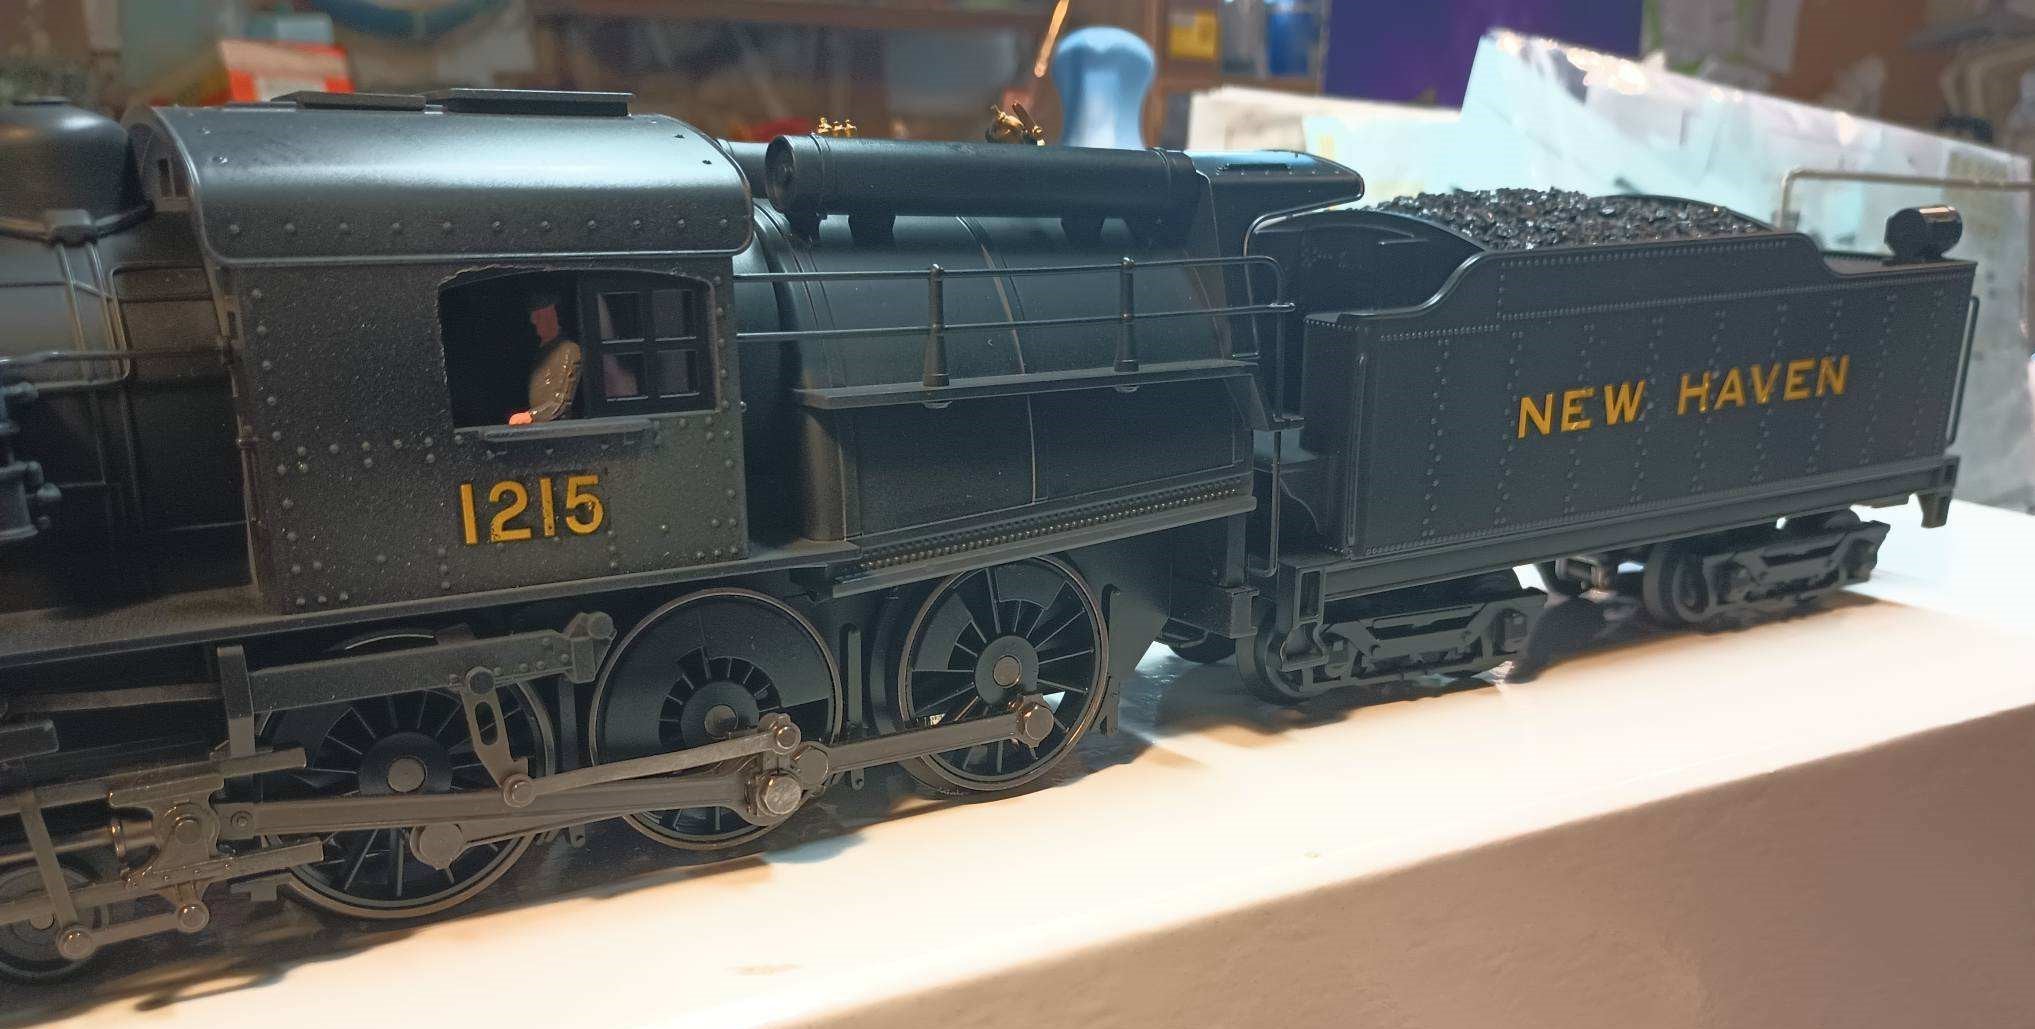 Lionel 2331650NH - Legacy Camelback Steam Locomotive "New Haven" 1215 - Custom by Harry Hieke